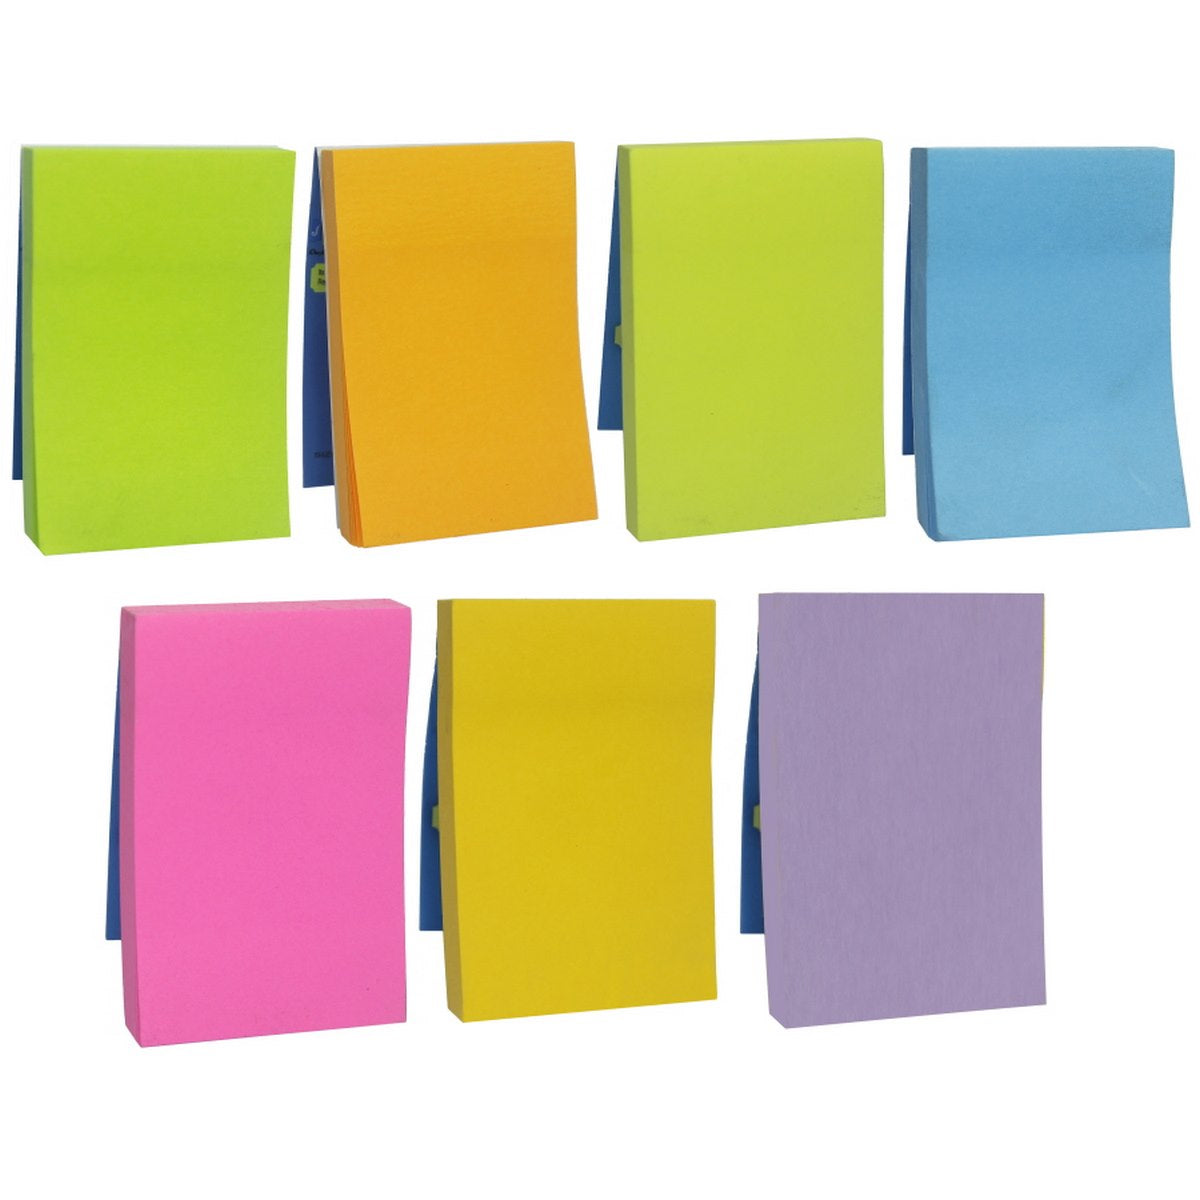 jags-mumbai Sticky Notes Neon Sticky Note Pad (Pack Of 6)